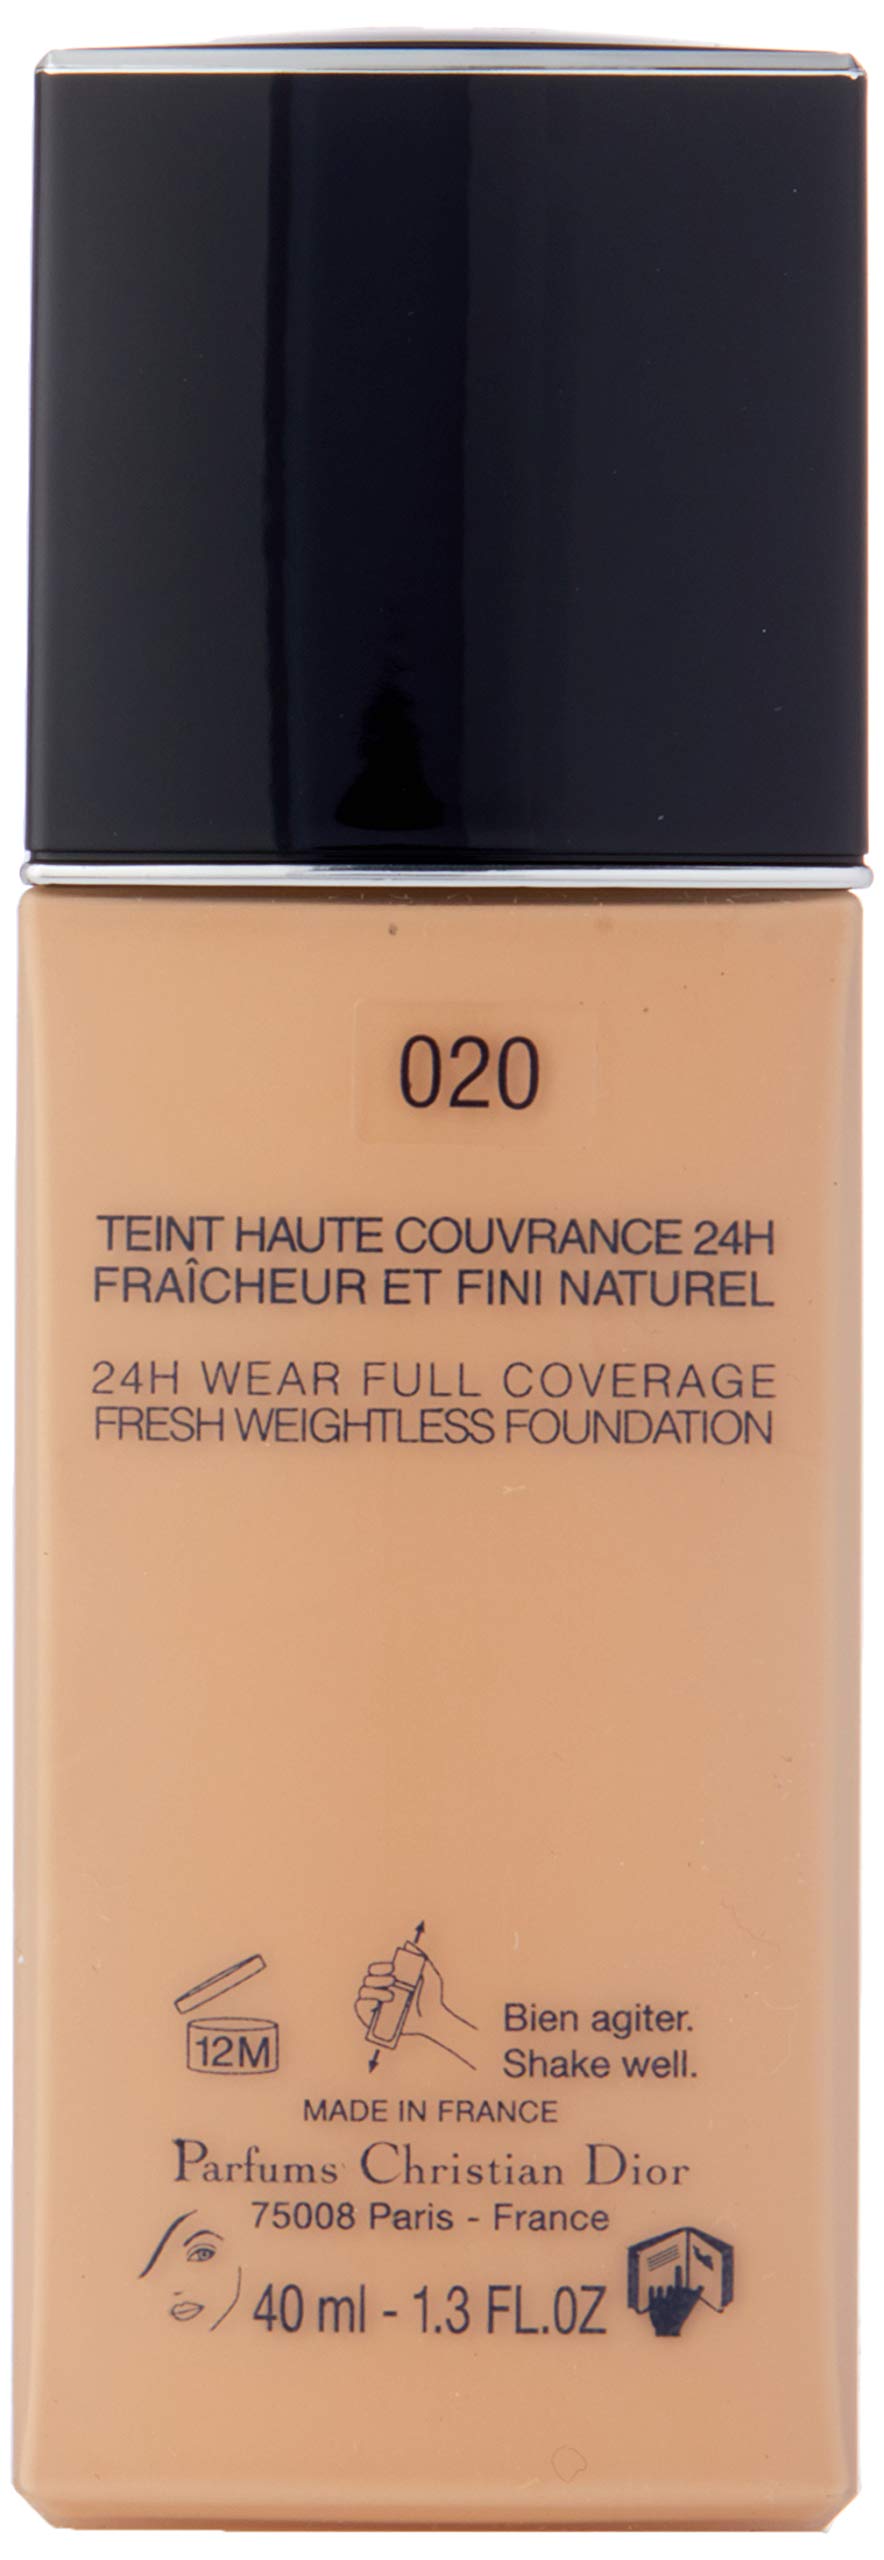 Dior Forever Undercover 24hr Full Coverage Foundation 40ml  SonAuth  Official